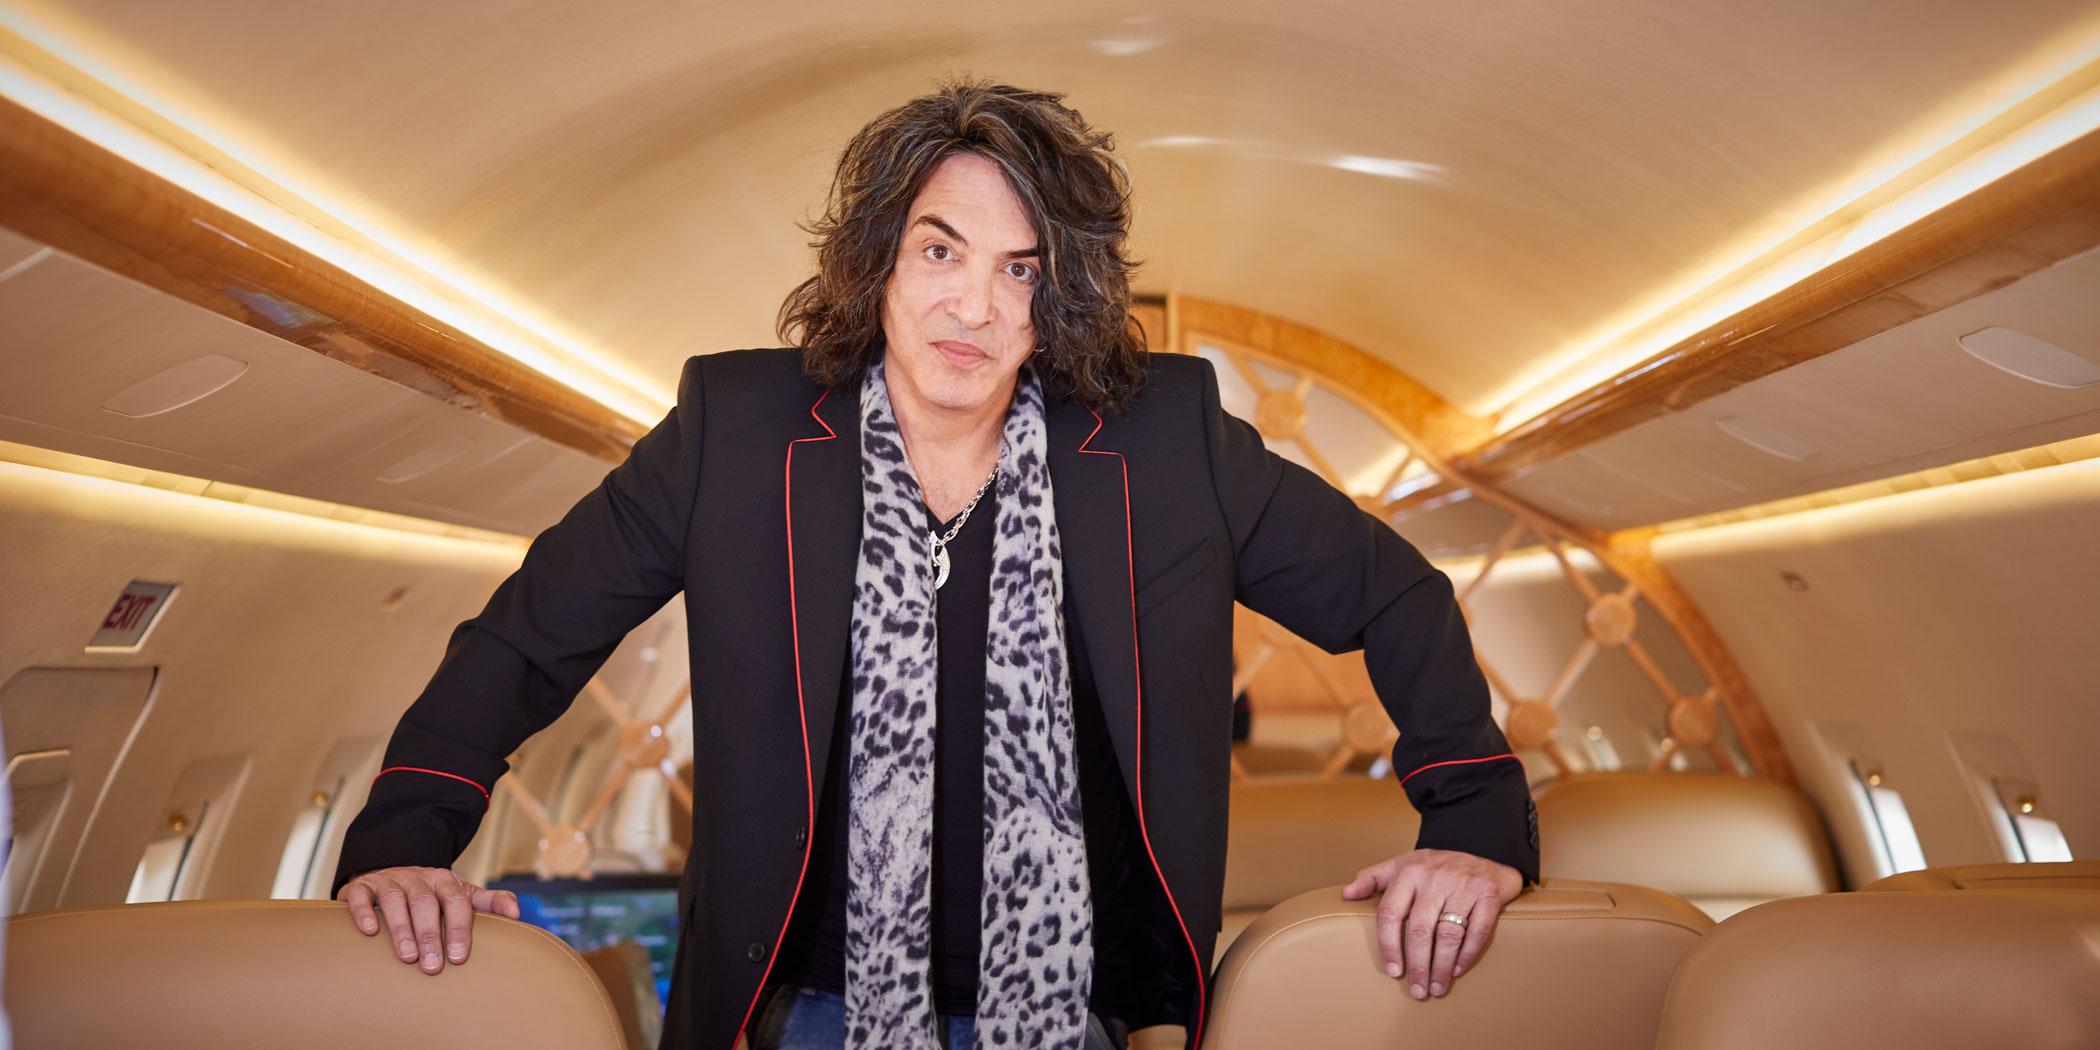 Paul Stanley, cofounder  of the rock band Kiss and a 2018 interviewee